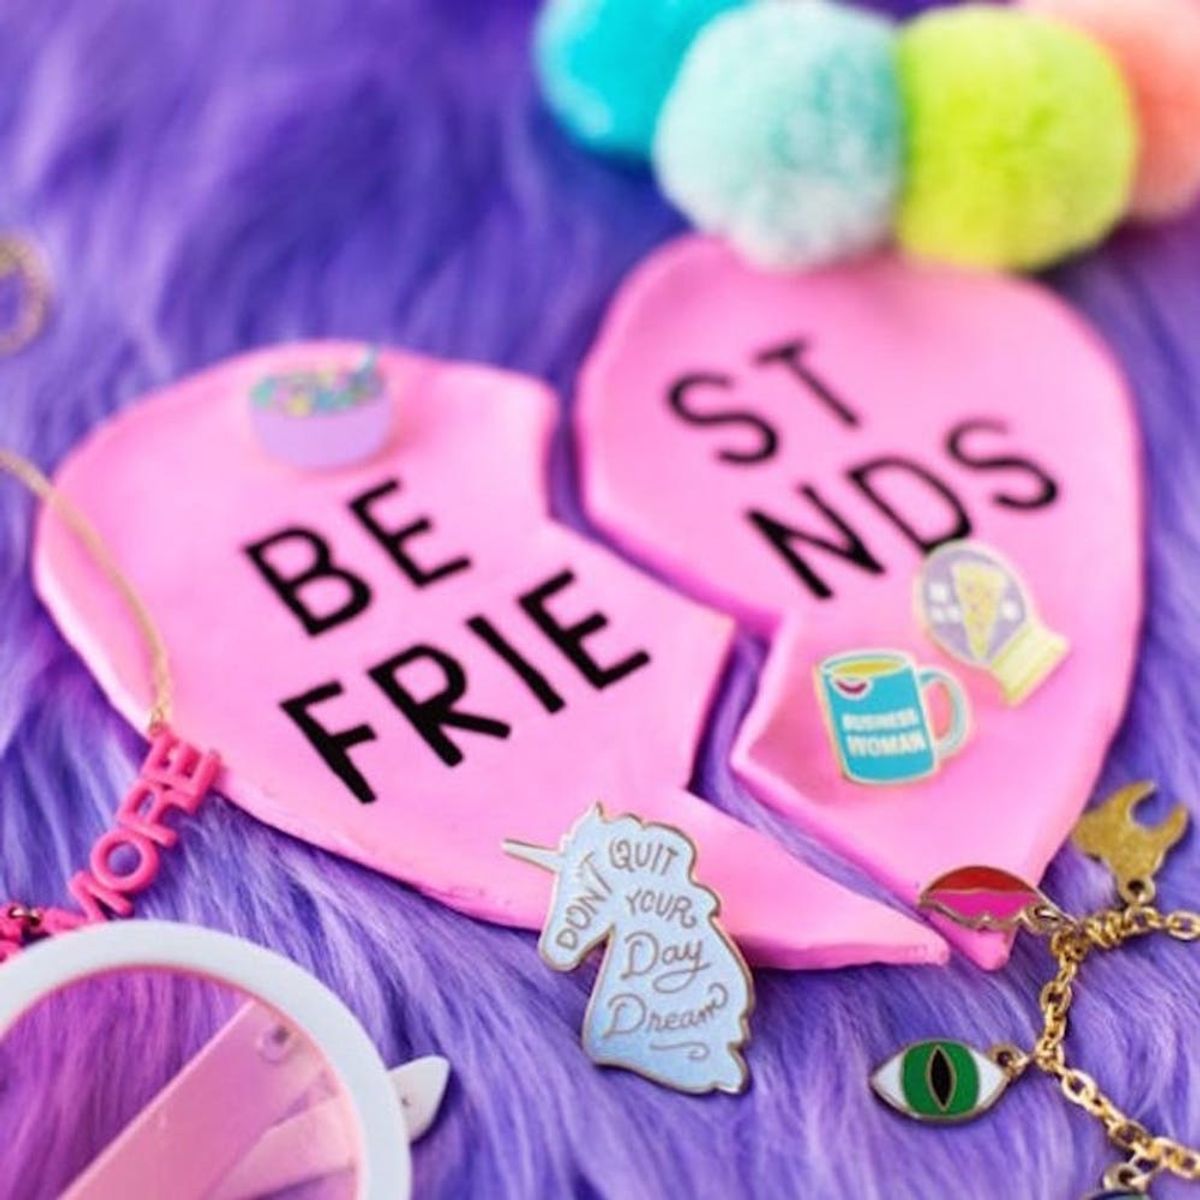 25 DIY Valentine’s Day Gift Ideas for Every Boo in Your Life